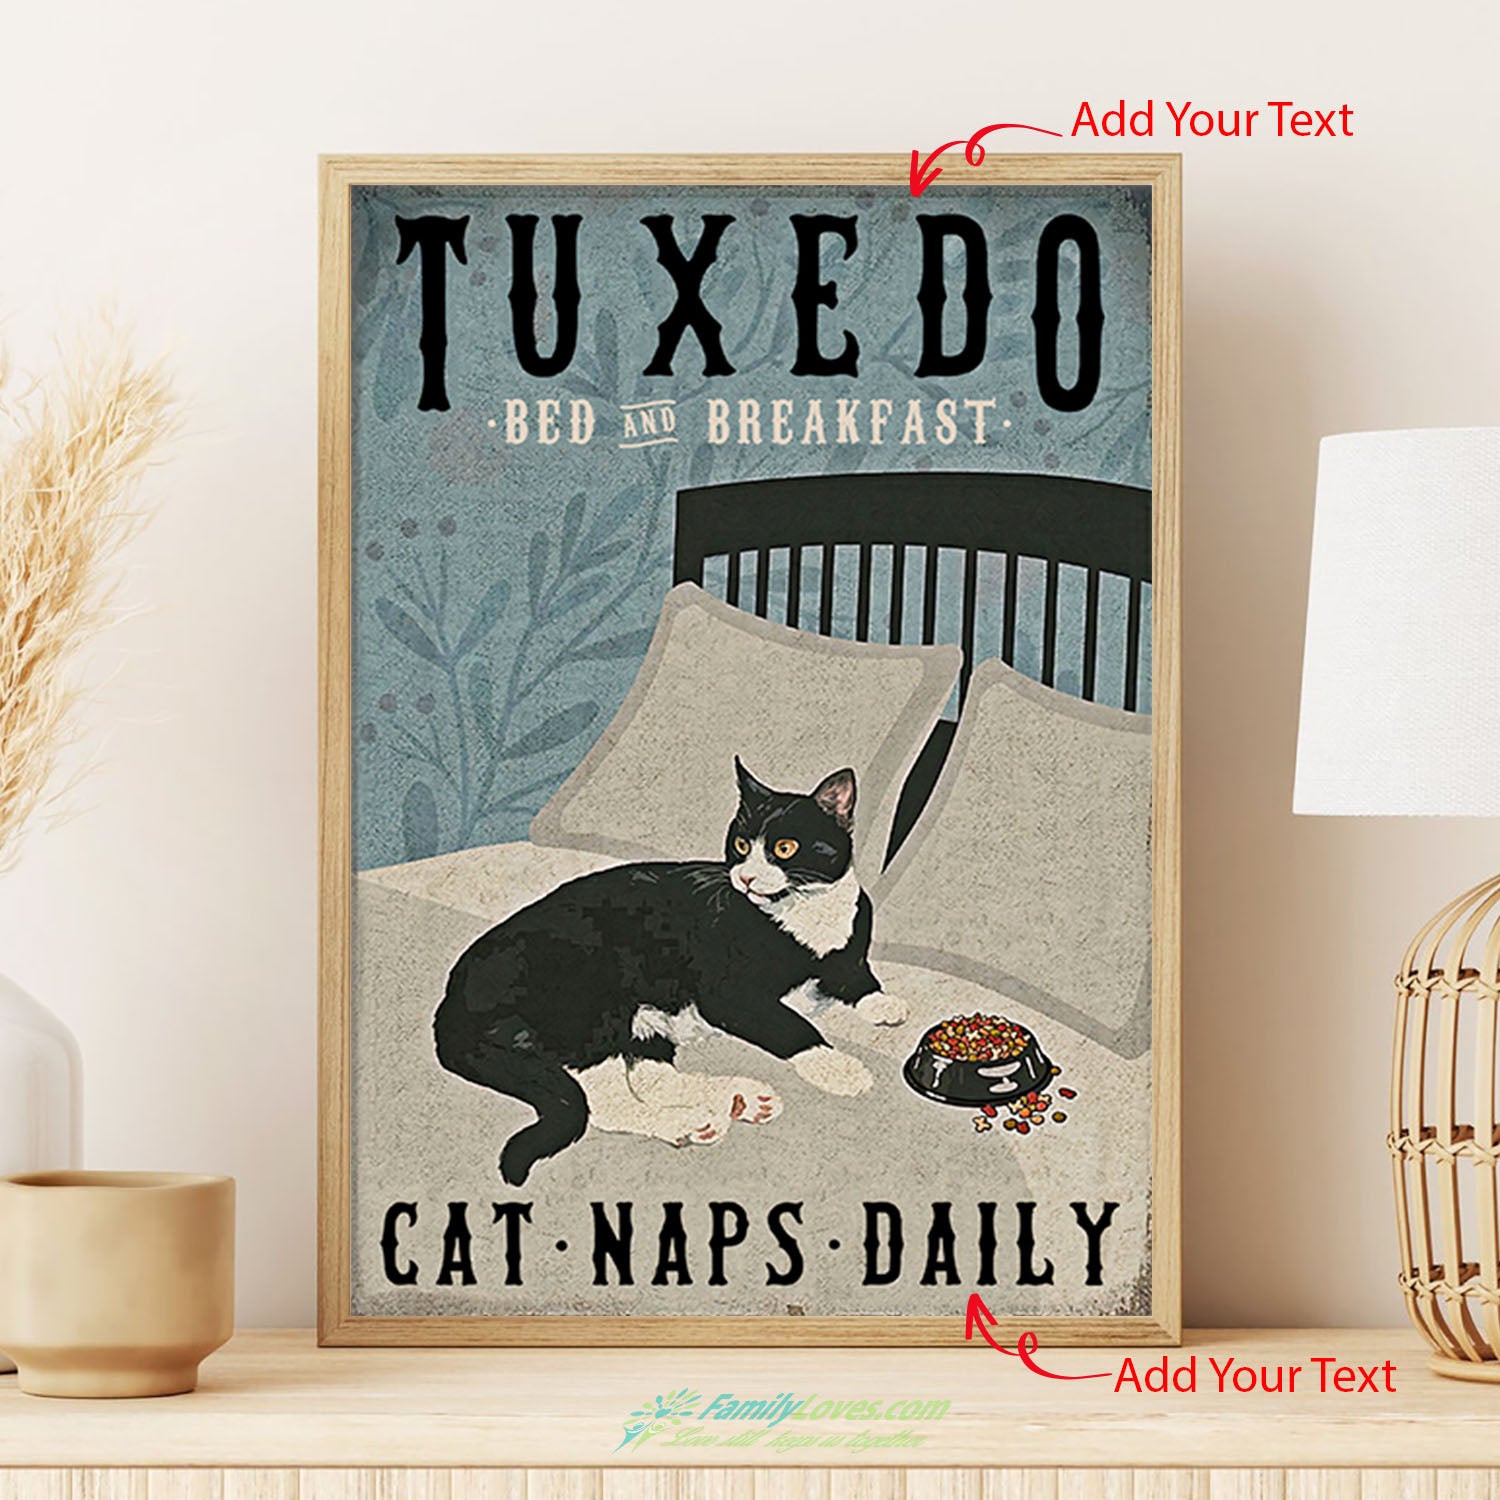 Tuxedo Cat Naps Daily Canvas Holder Poster 36X24 All Size 1